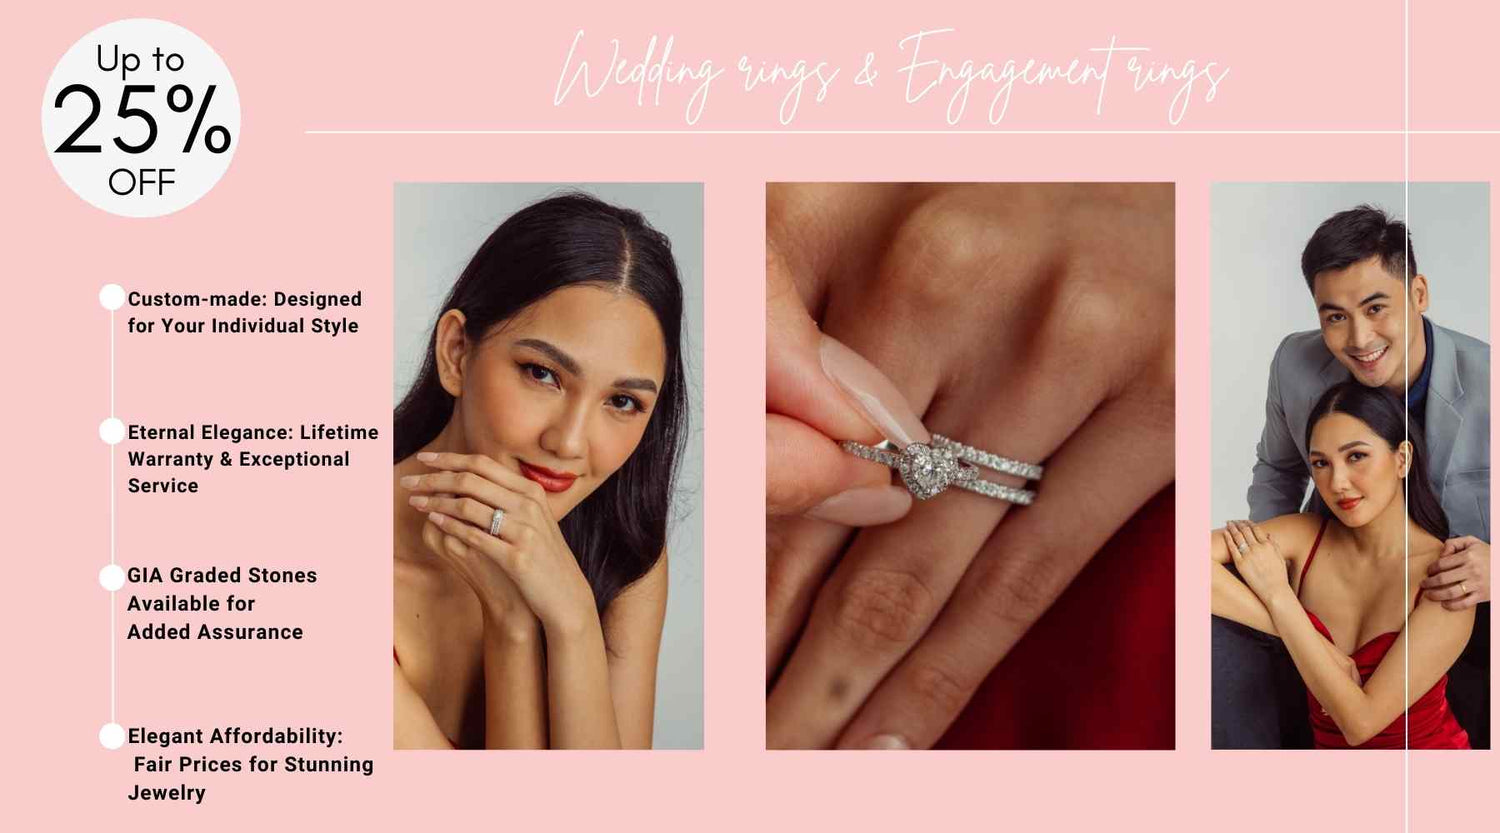 Engagement Ring finger, Engagement Ring philippines, Engagement Ring Design, wedding rings philippines, wedding rings design, wedding rings ongpin,  wedding rings gold, wedding rings manila, Jewelry shop near me, Jewelry brands philippines